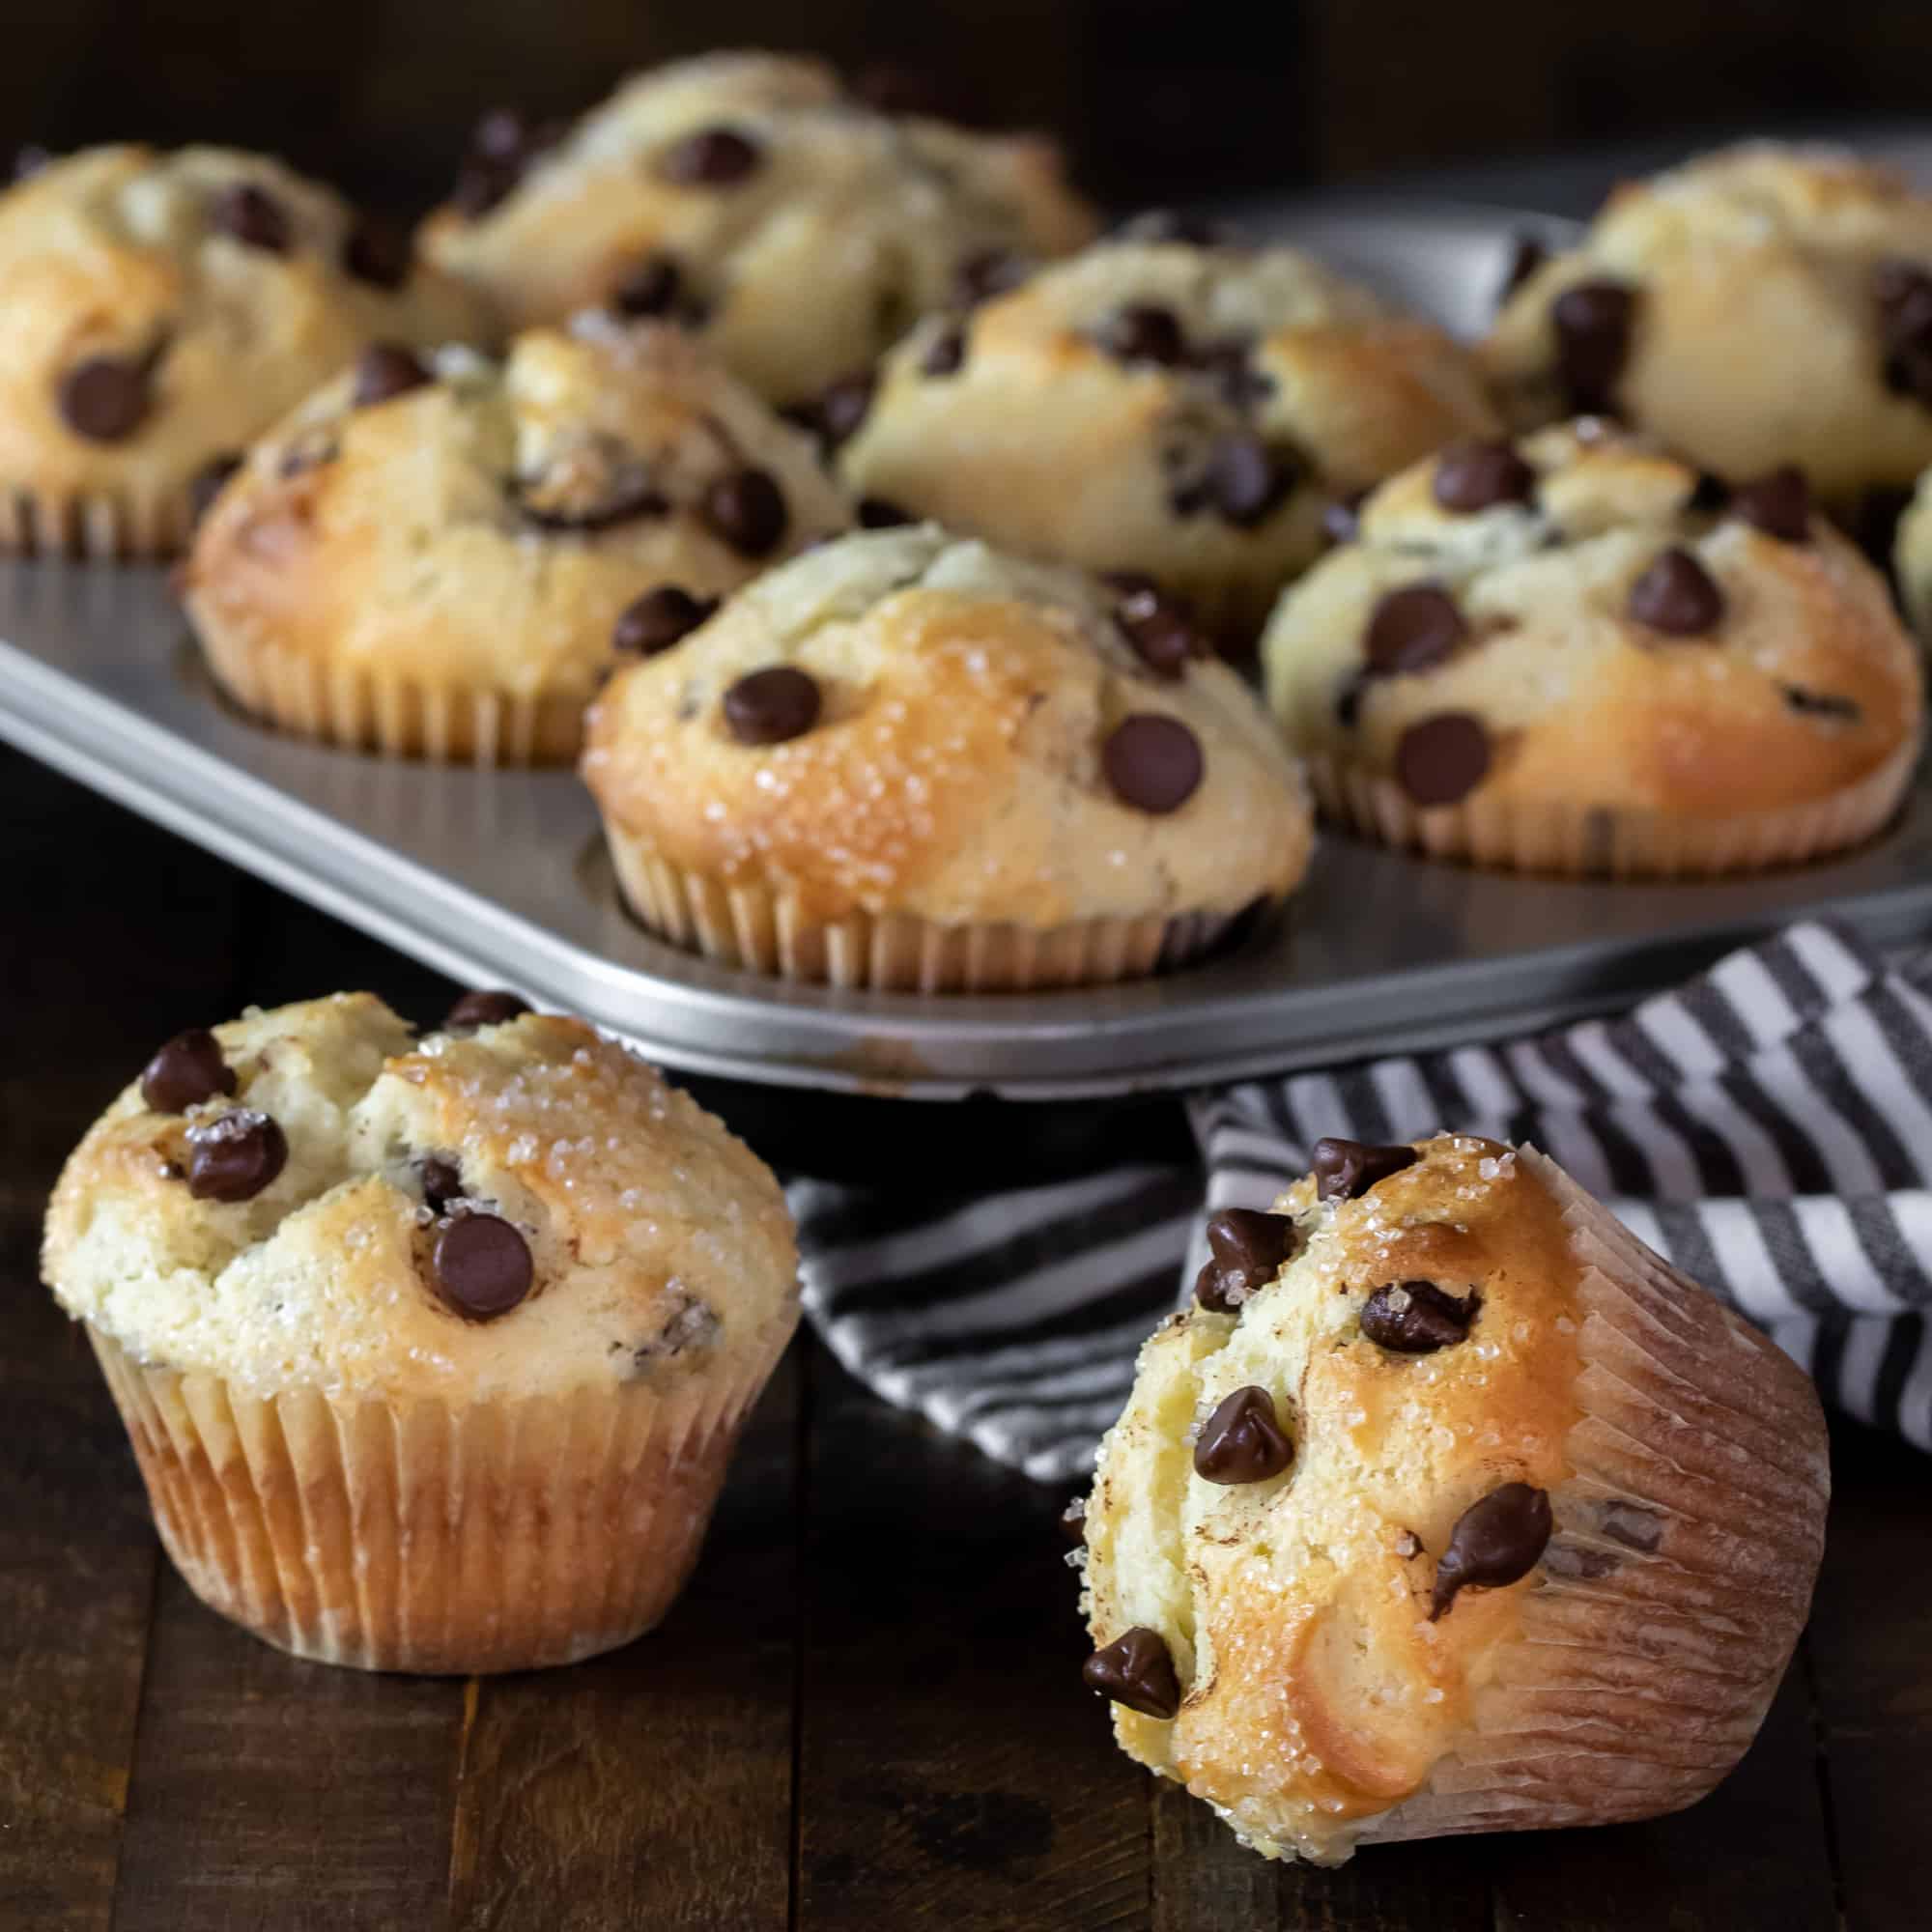 These chocolate chip muffins are perfect for a cup of coffee.